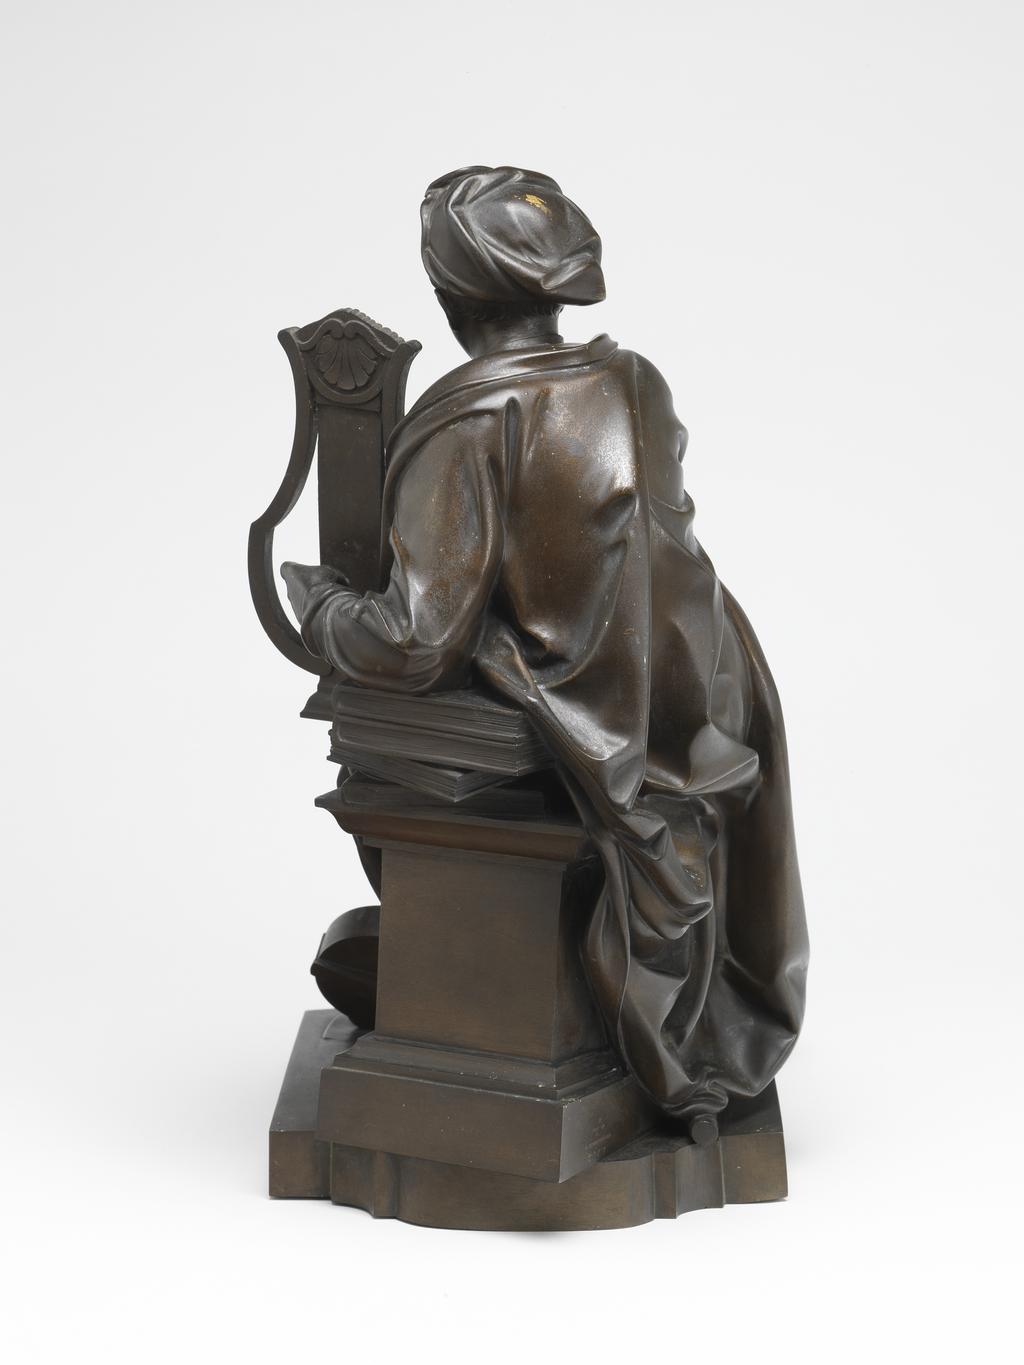 An image of Sculpture/Figure. George Frideric Handel as Apollo. Elkington & Co., England. Roubiliac, Louis François, after (French, 1702-1762 ). Reduced copy of the marble by Roubiliac. The pedestal is inscribed on the front. Bronze electrotype, height, figure, 34.5 cm, width, figure, 18.3 cm, diameter, figure, 27.3 cm, height, base, 20.5 cm, width, base, 20.7 cm, diameter, base, 27.6 cm, circa 1859.